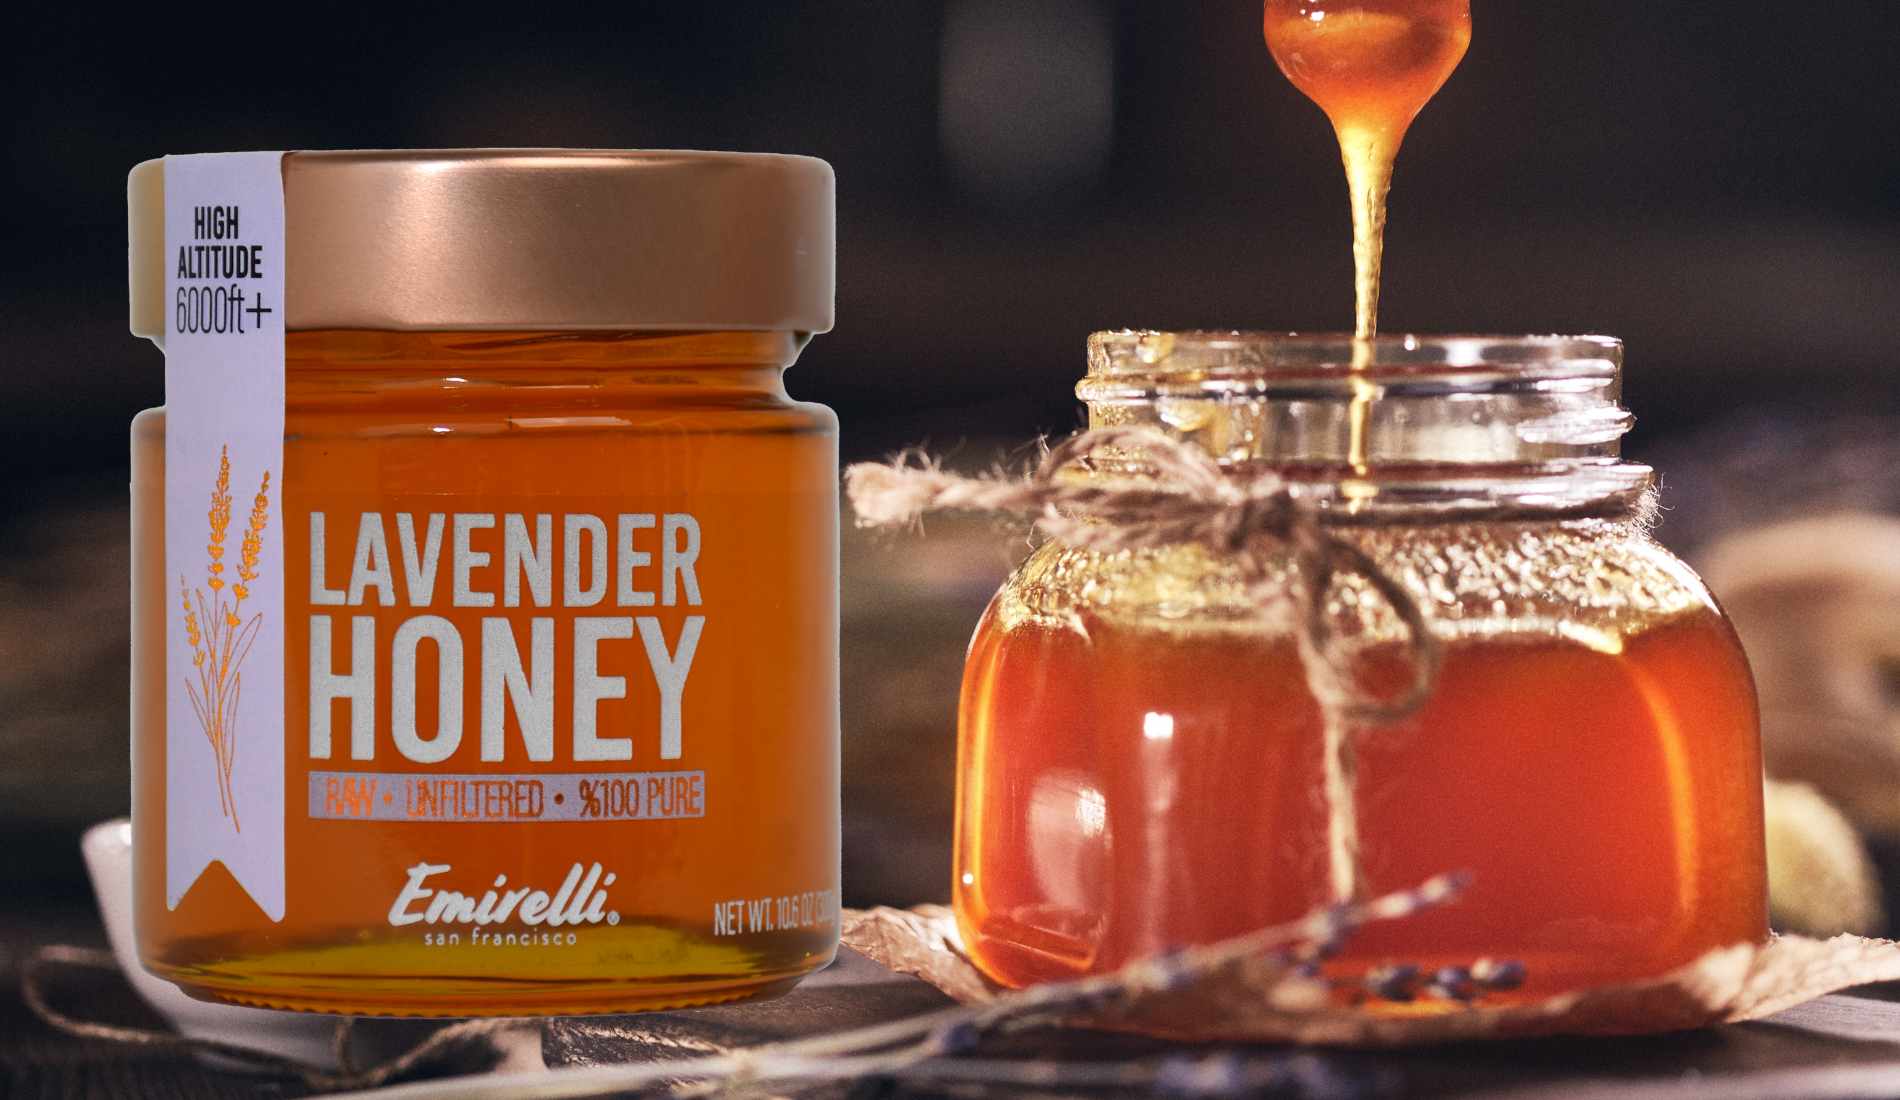 Discover the Relaxing Aroma and Taste of Emirelli's Lavender Honey